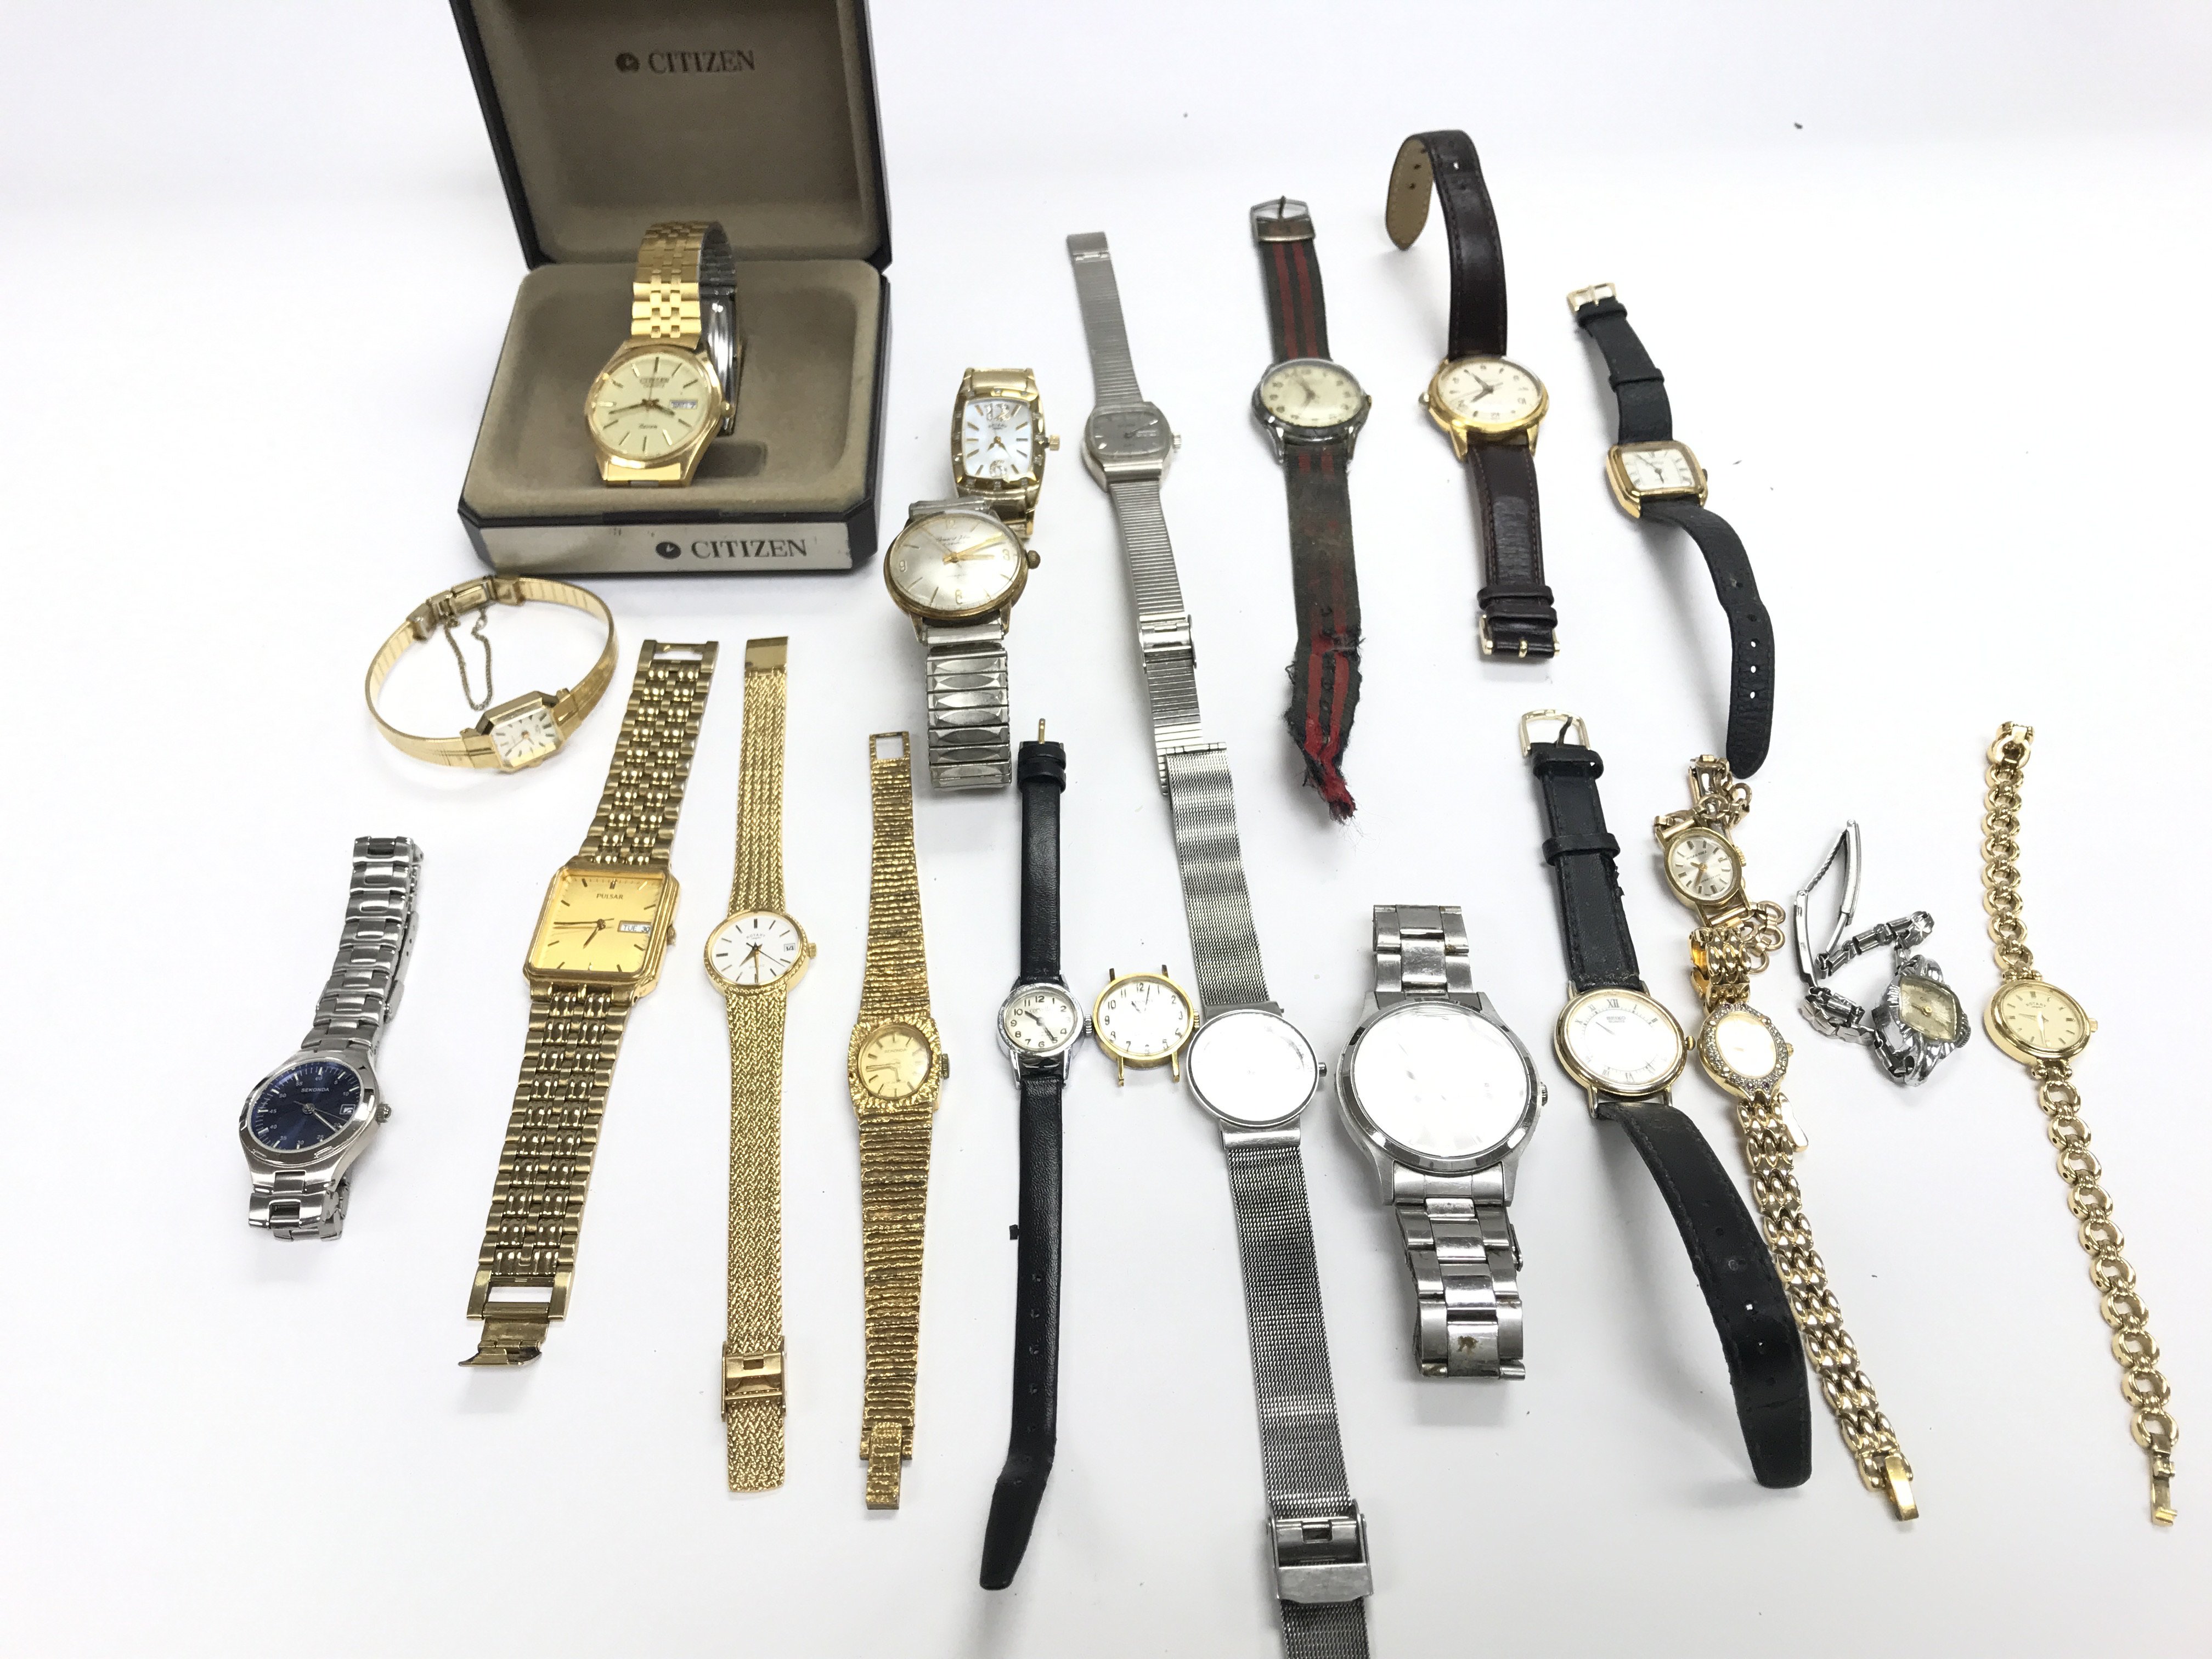 Collection of watches including Seiko - citizen -